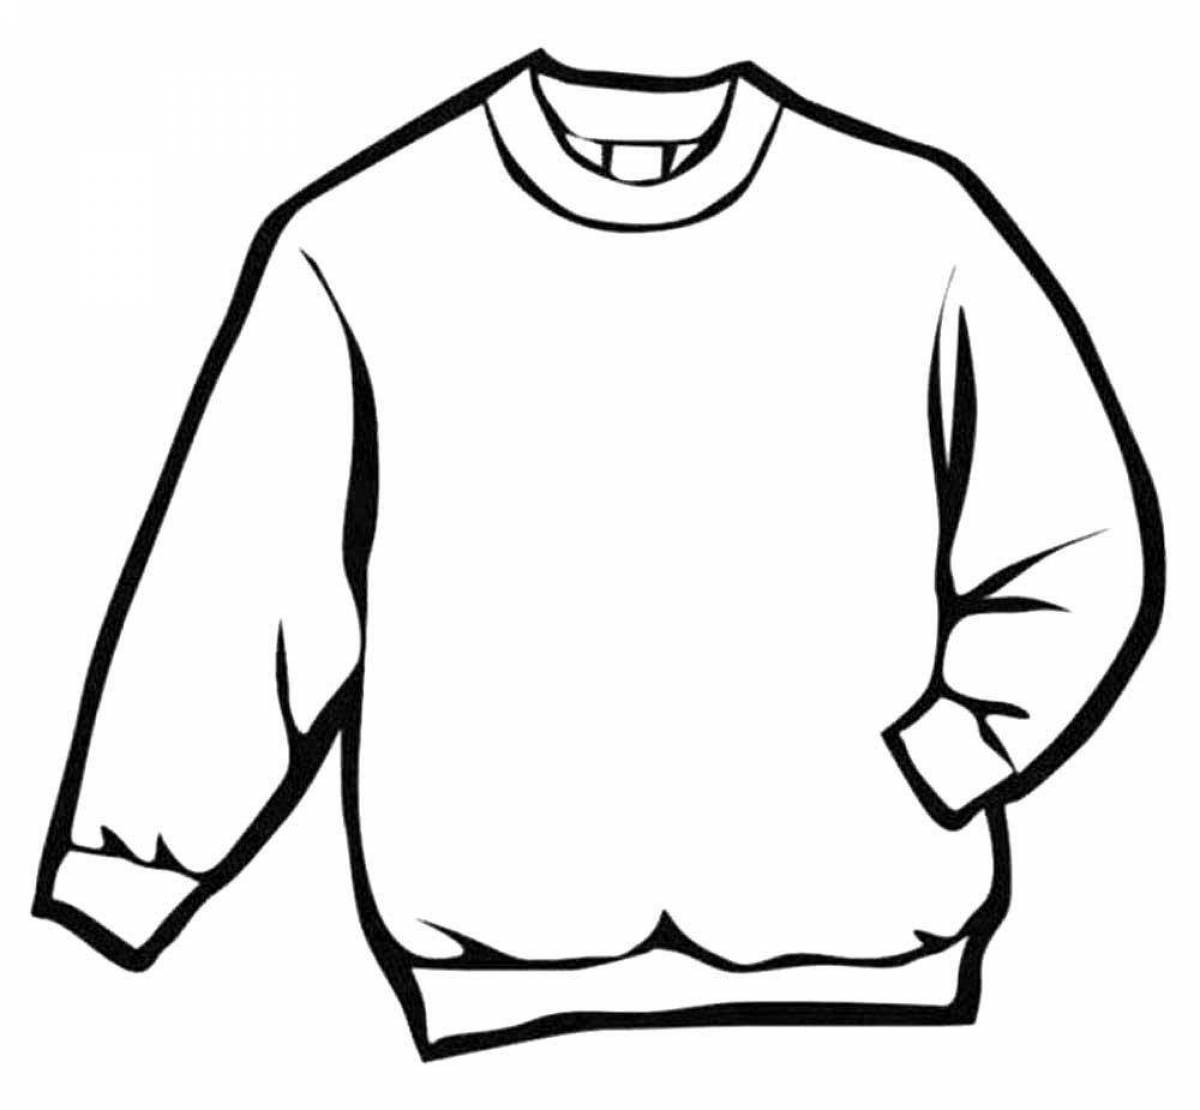 Bright sweater coloring page